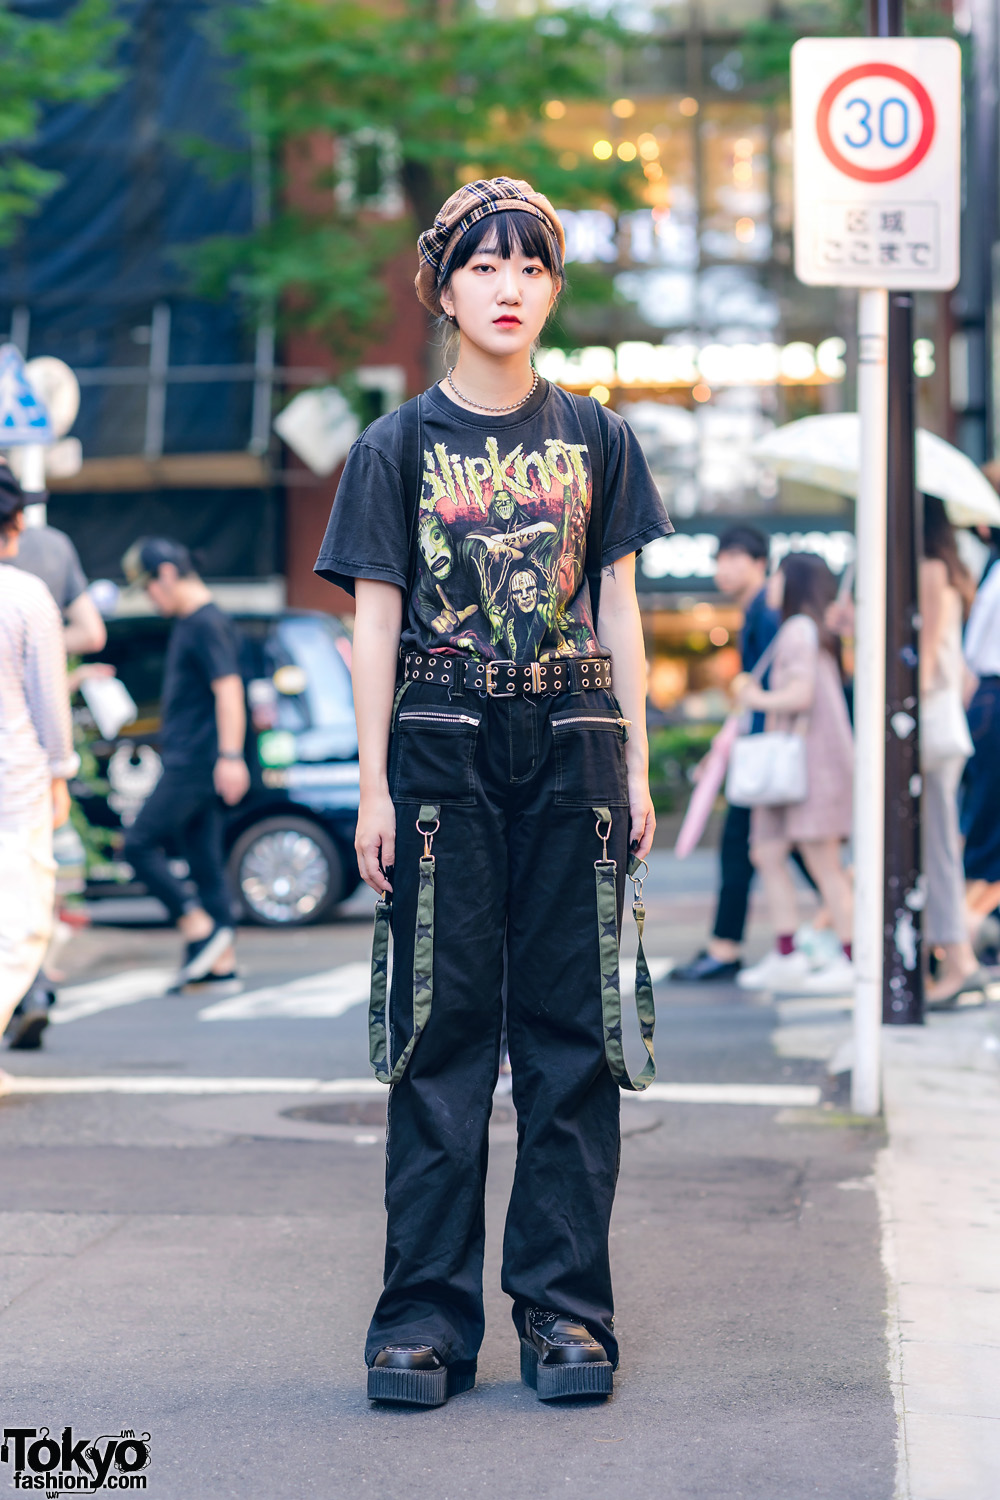 All Black Casual Street Style w/ Plaid Beret, Slipknot Band Tee, Tripp NYC Pants, BPH Backpack & Creepers